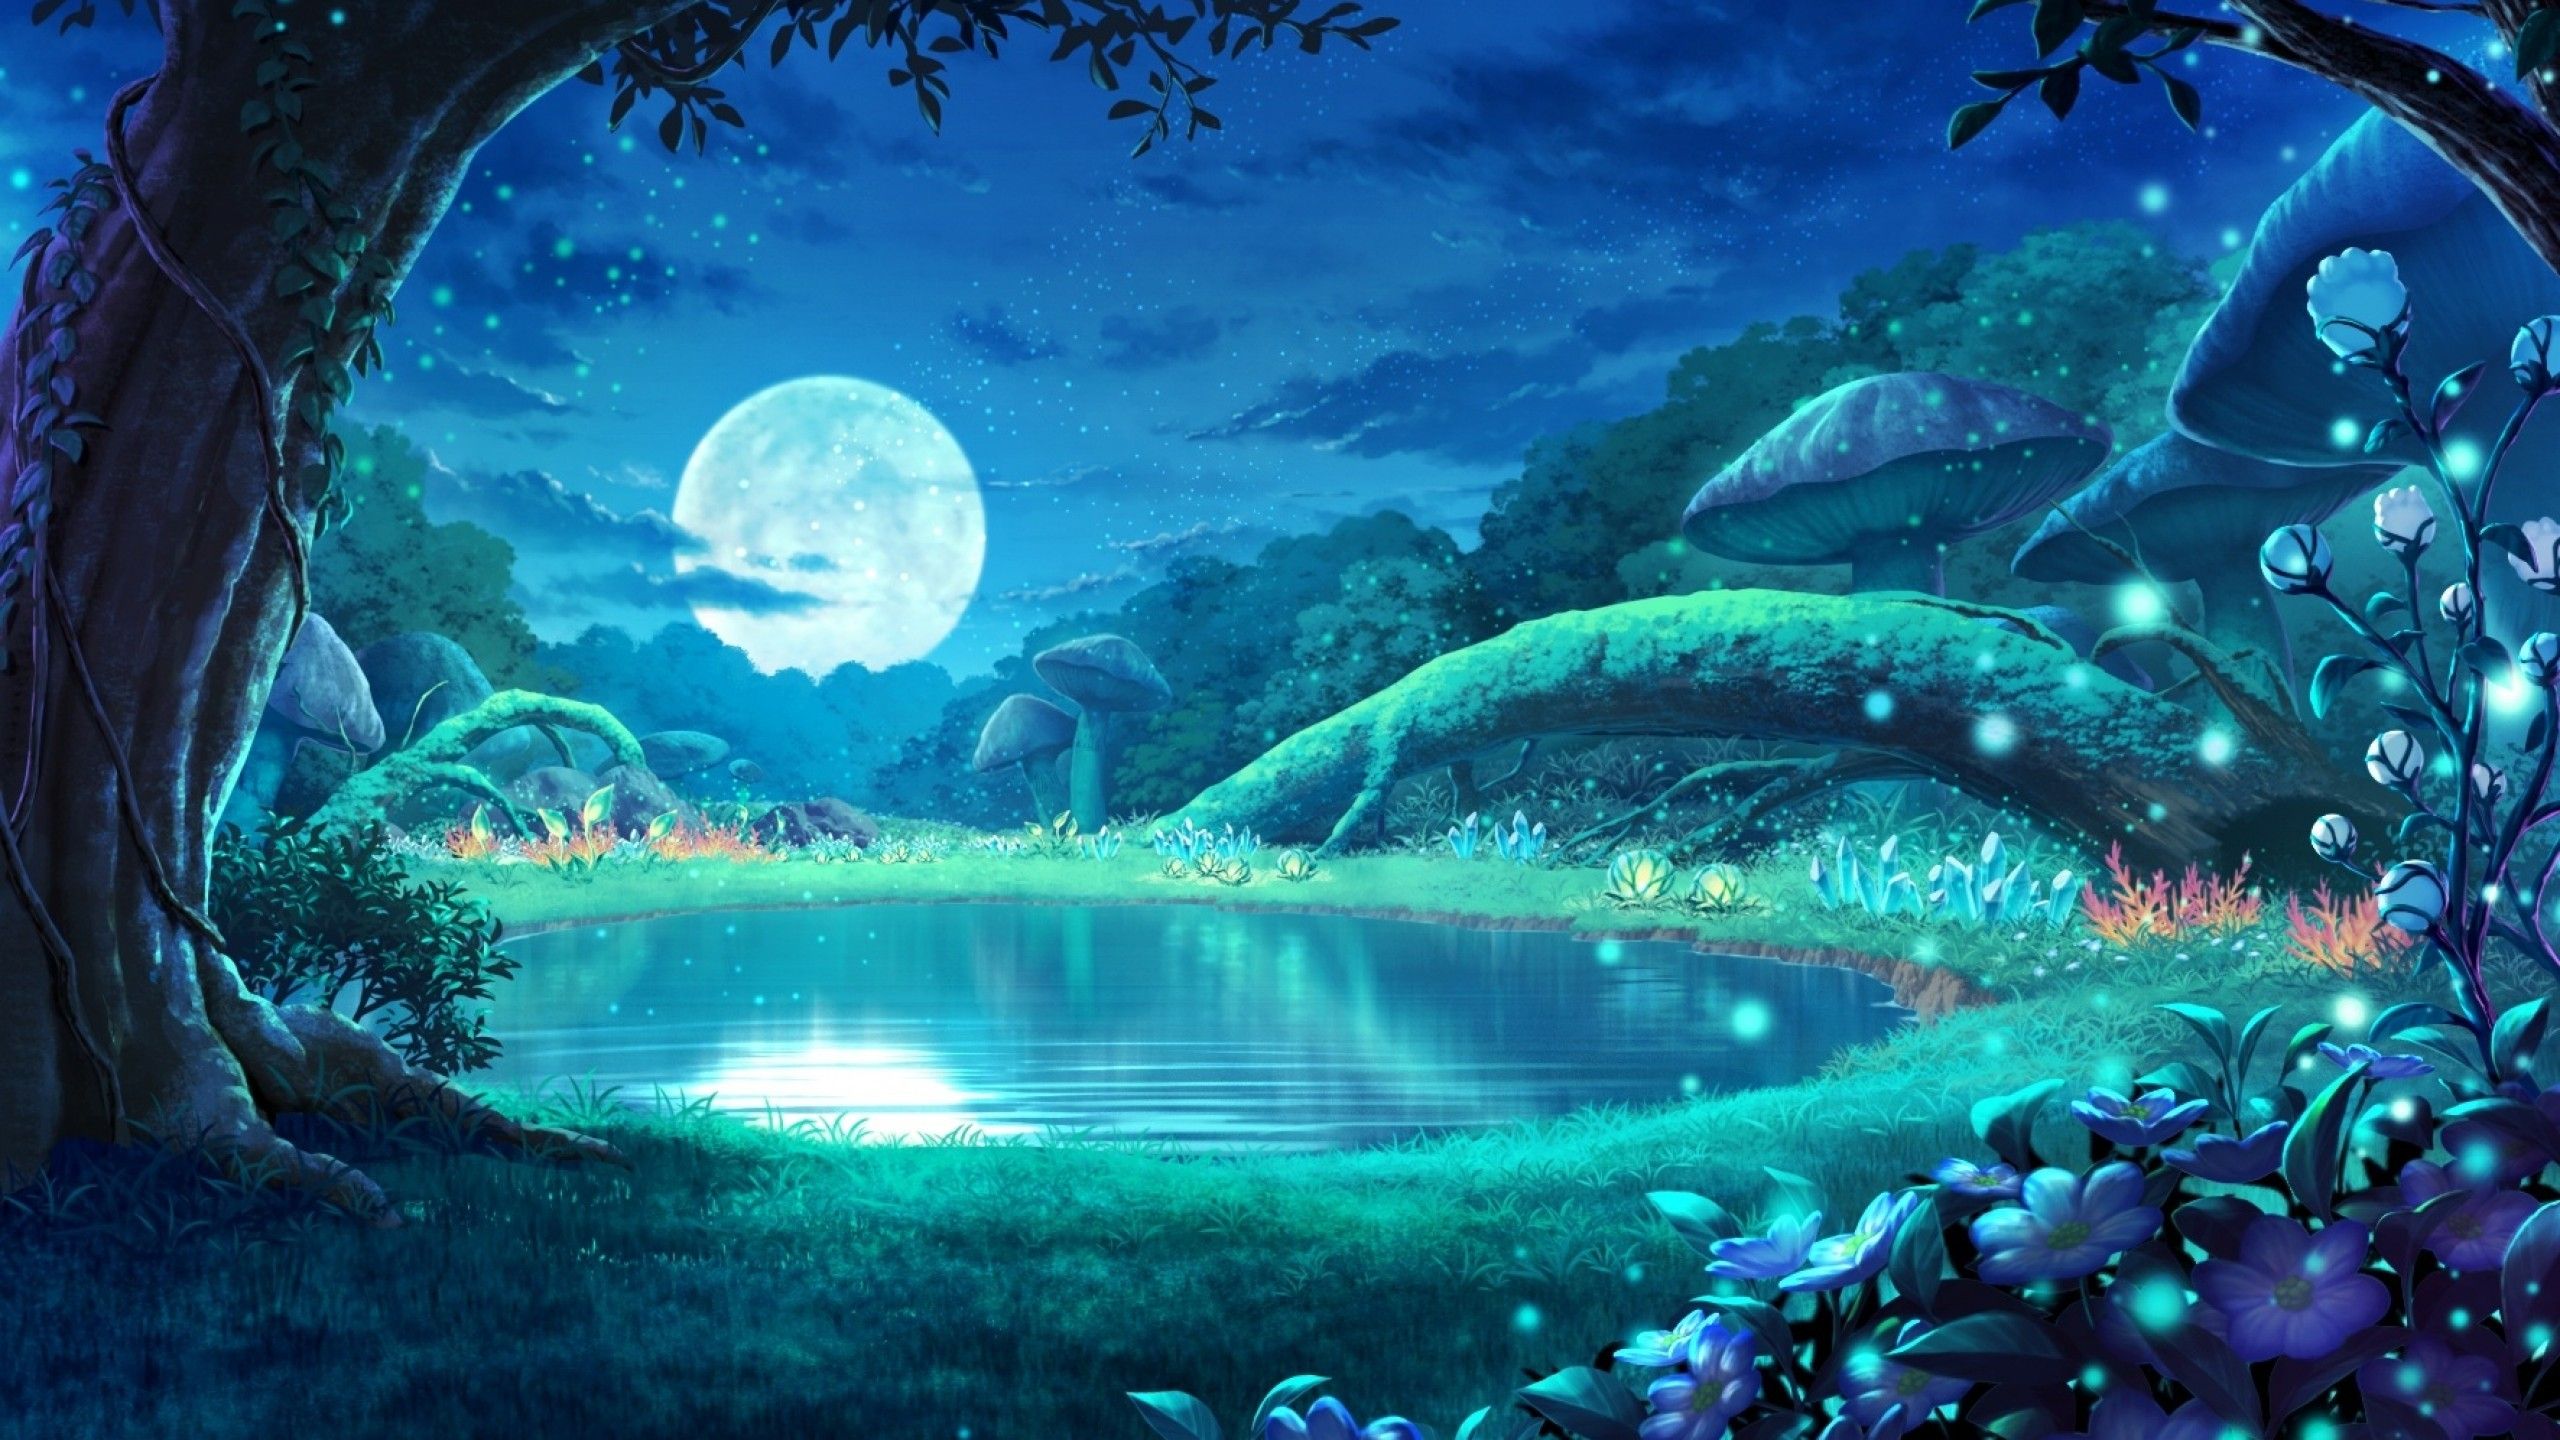 Download 2560x1440 Anime Landscape, Moonlight, Forest, Reflection, Mushrooms, Stars, Night Wallpaper for iMac 27 inch